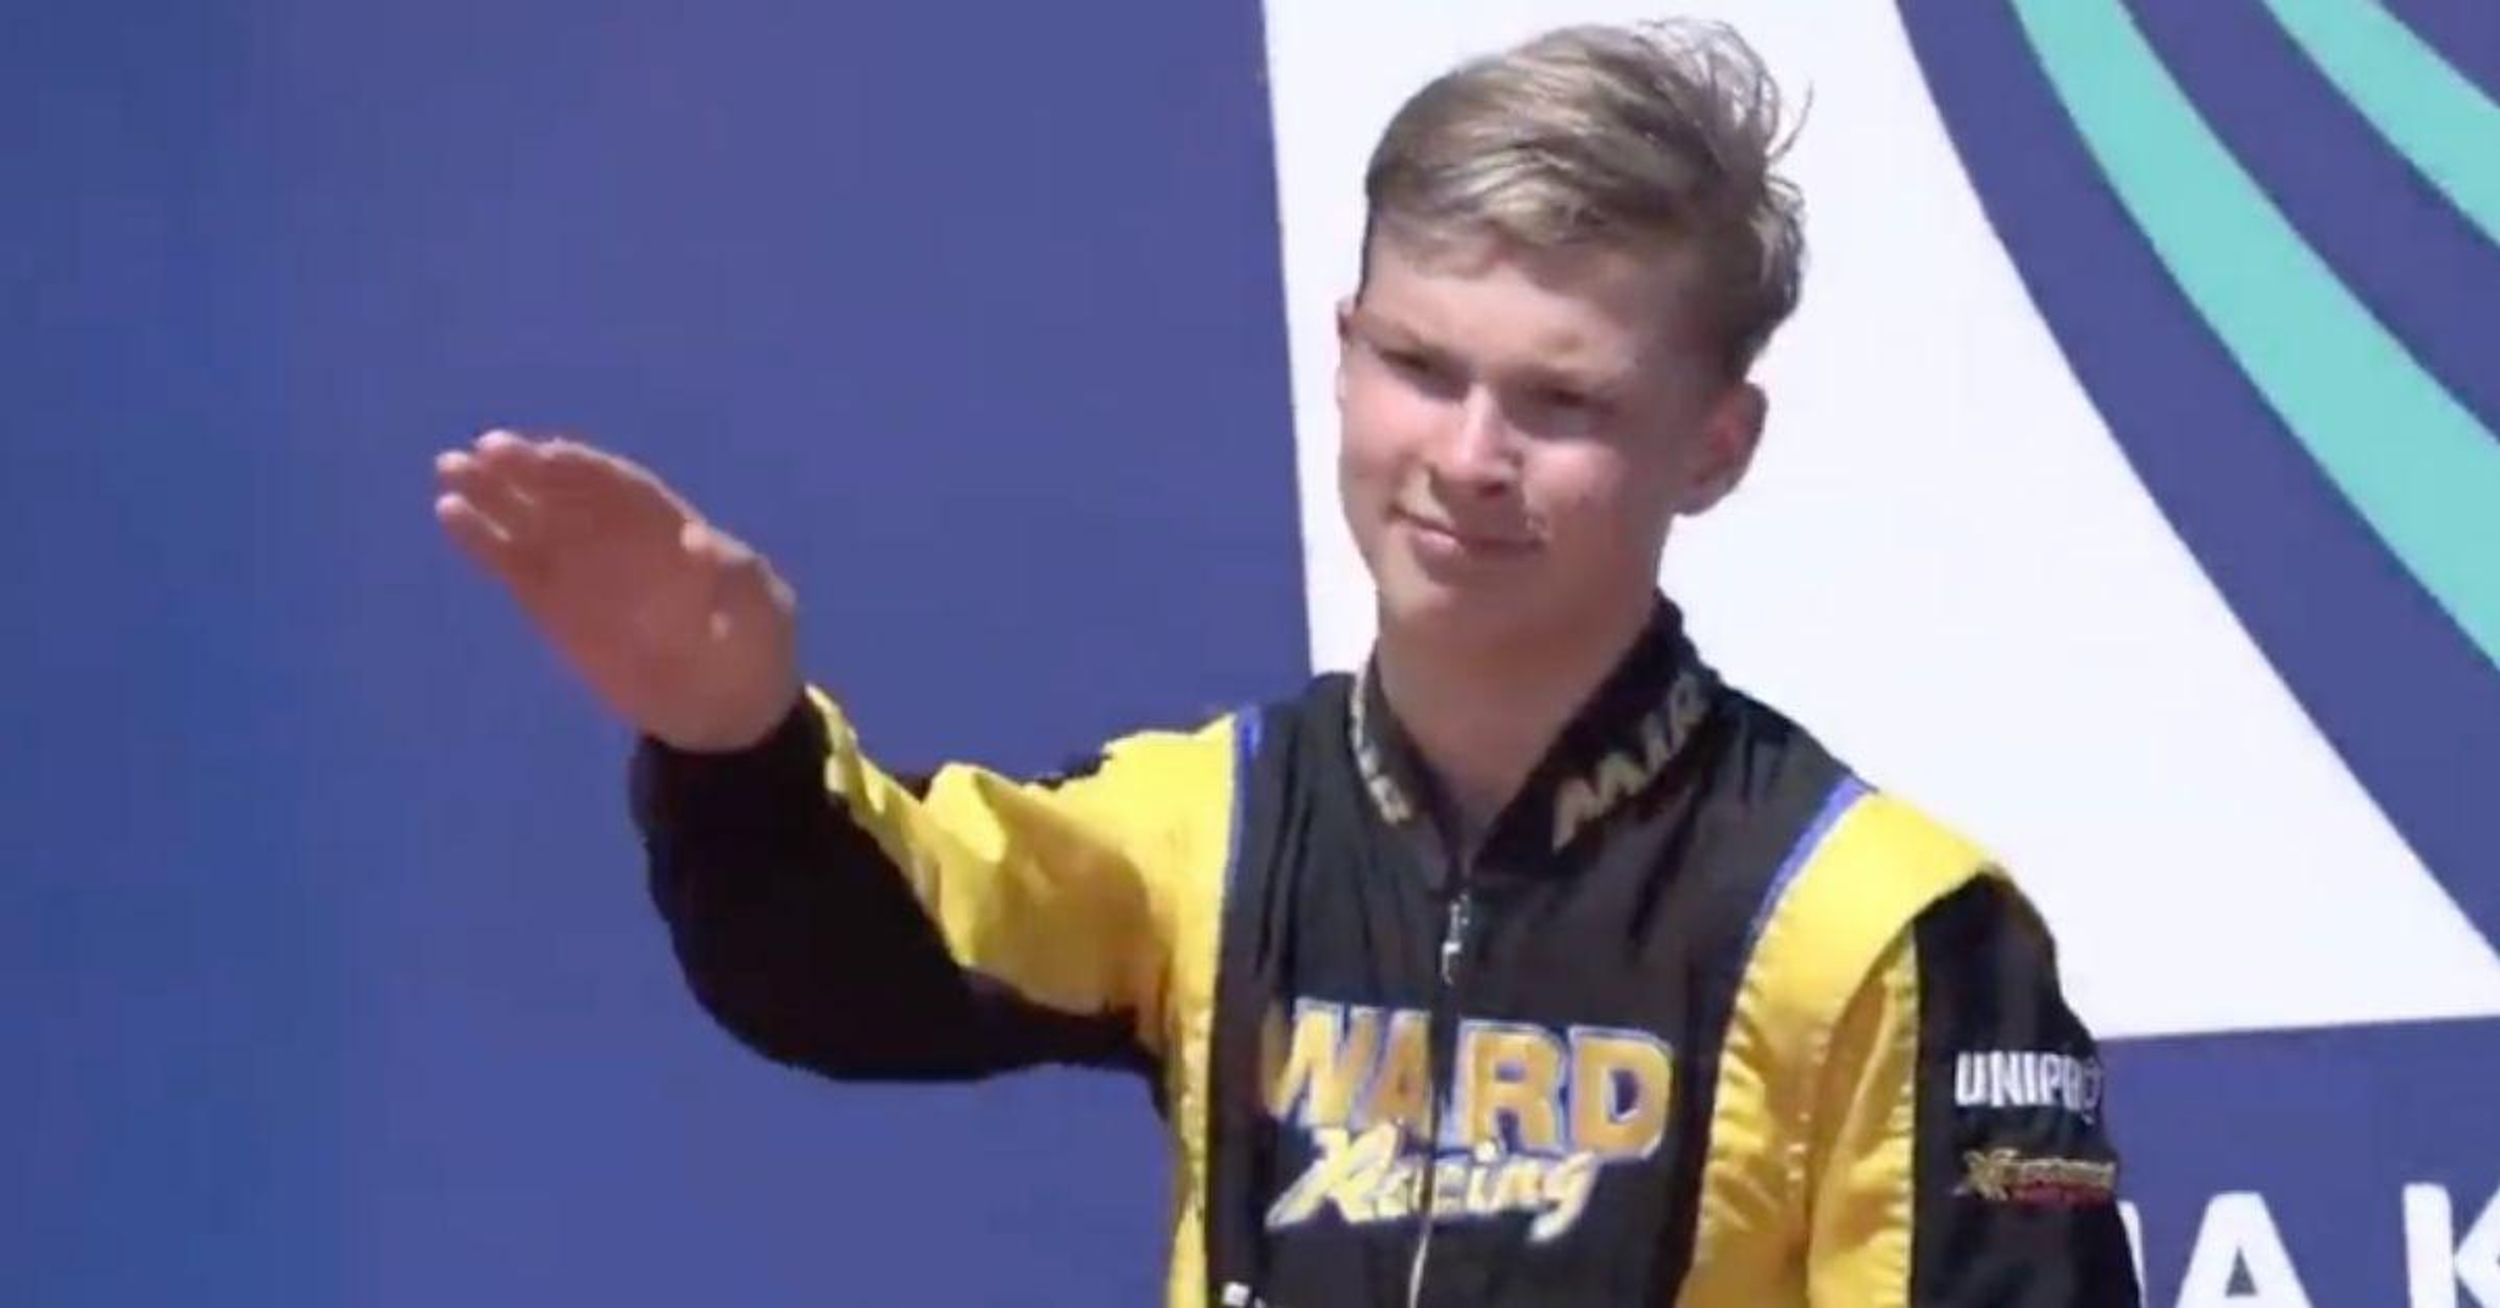 Russian Junior Go-Karting Champ Sparks Outrage By Appearing To Do Nazi Salute On Podium After Win